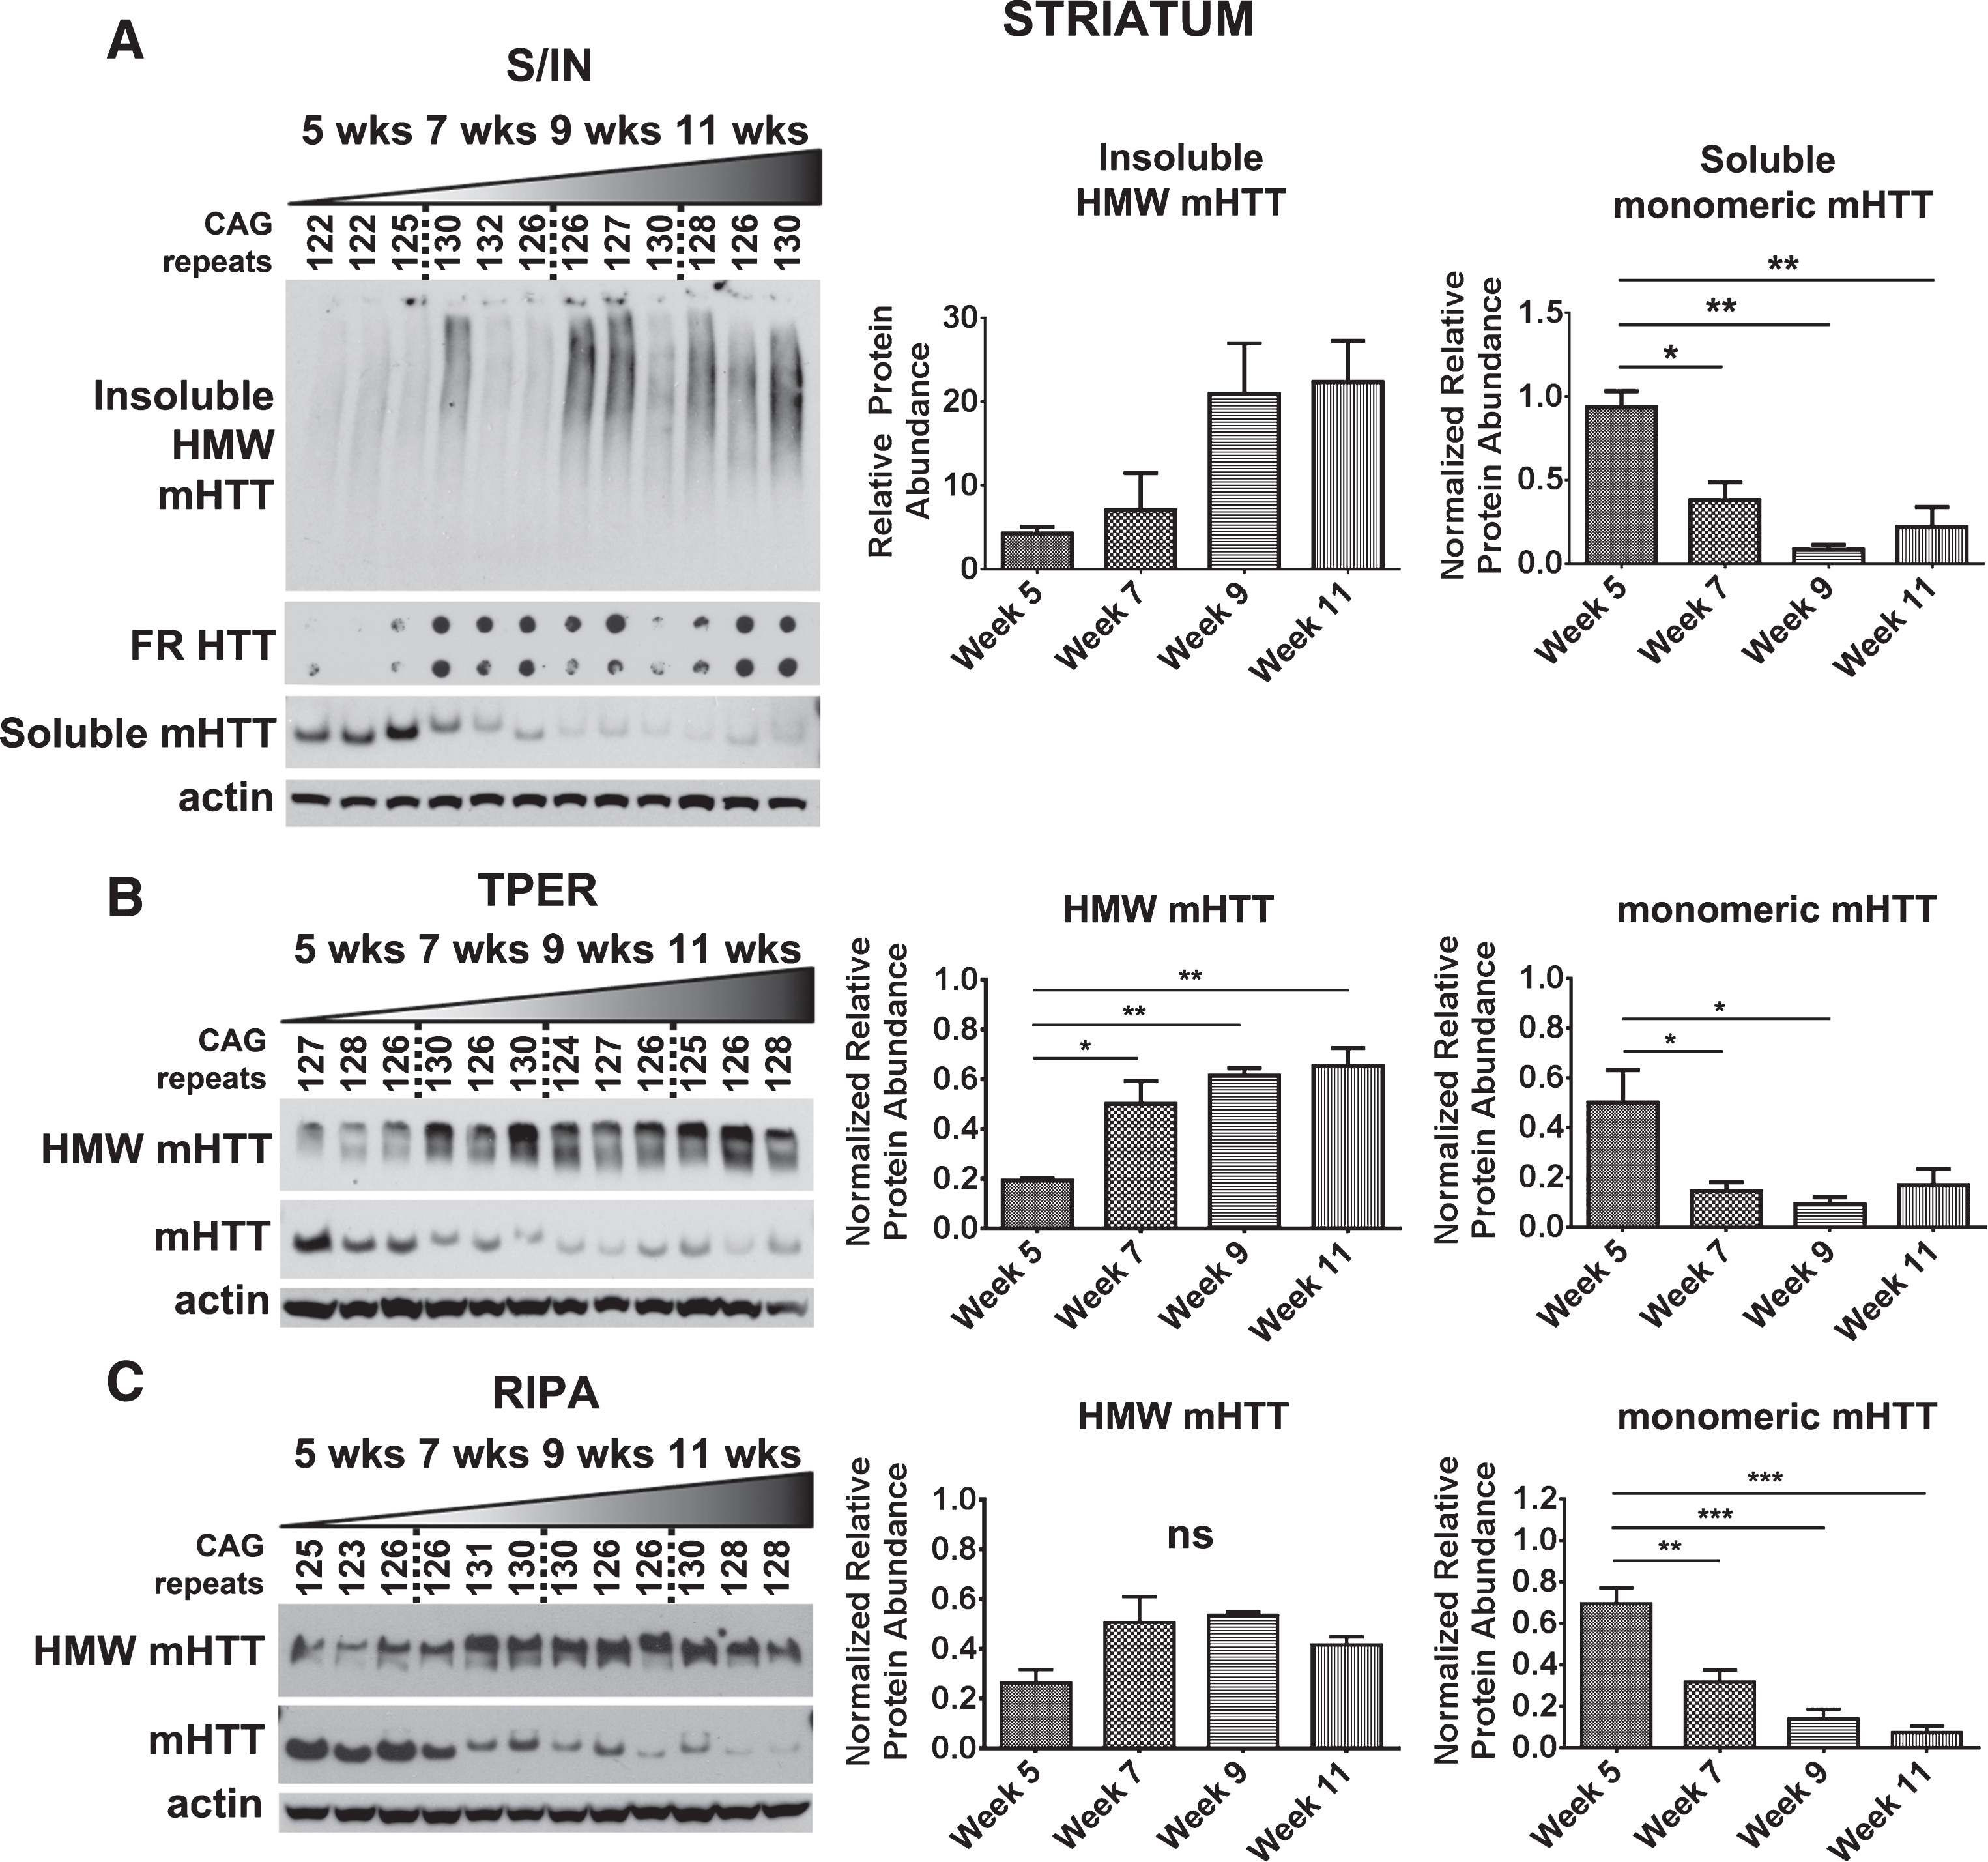 Detection of mHTTex1p in striatum of R6/2 mice. A) Striatal time-course samples were fractionated into Soluble and Insoluble proteins. Insoluble fraction reveals an increase in a HMW species of mHTTex1p throughout disease progression (F3,8 = 4.274, p < 0.05). Soluble fraction shows an inverse, significantly decreased monomeric form of mHTTex1p throughout disease progression (F3,8 = 15.51, p < 0.01). Insoluble aggregates detected by filter retardation (FR) assay may show a slight increase throughout disease progression‡. Striatal tissue samples broken in B) T-PER (Monomer: F3,8 = 5.85, p < 0.05, HMW: F3,8 = 12.12, p < 0.01) and C) RIPA (Monomer: F3,8 = 25.44, p < 0.001, HMW: F3,8 = 4.06, p > 0.05) reagents show a significant reduction of monomeric mHTex1pT throughout disease progression. Fluctuations in soluble, monomeric mHTTex1p correspond to varying CAG repeats in R6/2 mice. Western blots quantified by mean pixel value. Soluble fraction normalized to actin and analyzed by 1-way ANOVA followed by Tukey’s multiple comparison test. *p < 0.05, **p < 0.01, values represent means±SEM. n = 3 for all time points. HTT antibody MAB5492 used to detect mHTTex1p. Panel (A) has been modified with permission [42]. ‡Reprinted from Grima et al., 2017 [42] with permission from Elsevier.